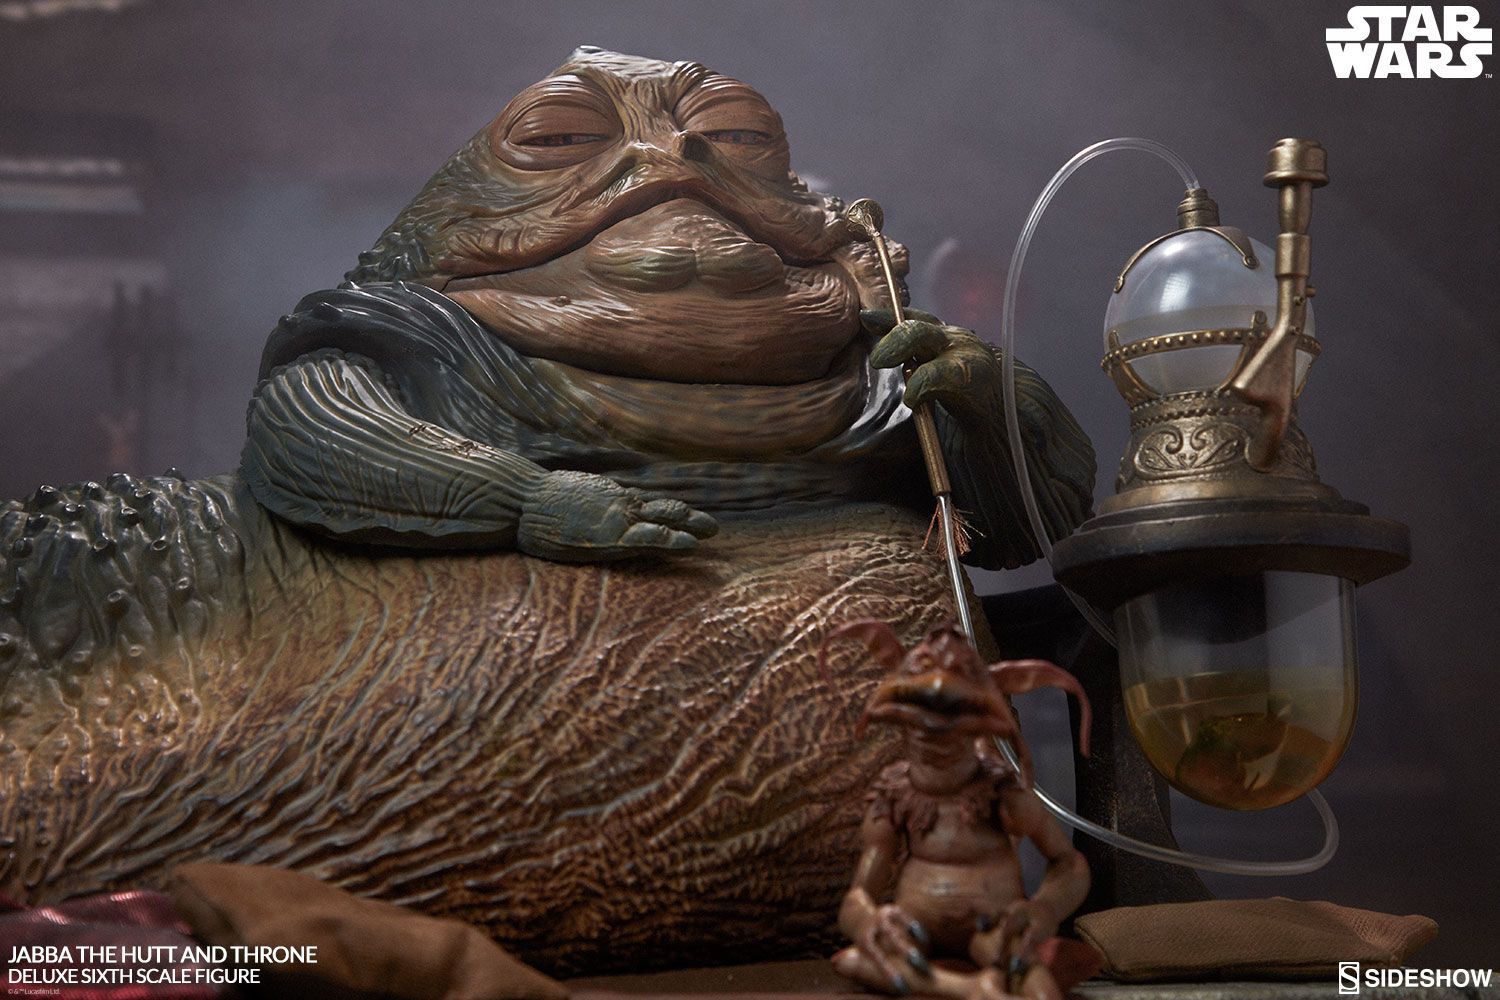 jabba-the-hutt-and-throne-deluxe_star-wars_gallery_5c4ccc980e92e.jpg